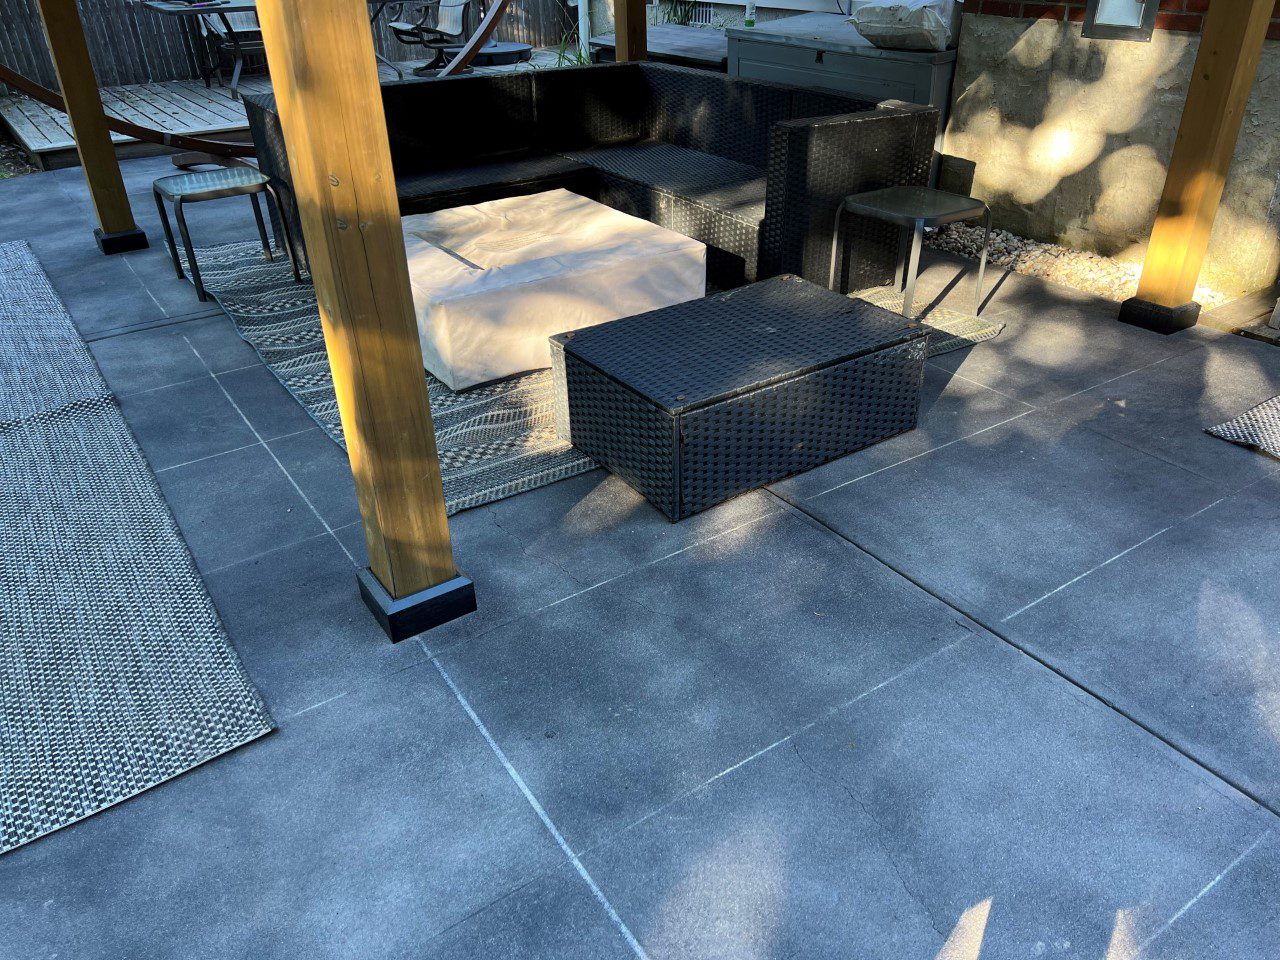 Black Antiquing stained concrete patio surface with tape creating a large tile design pattern.